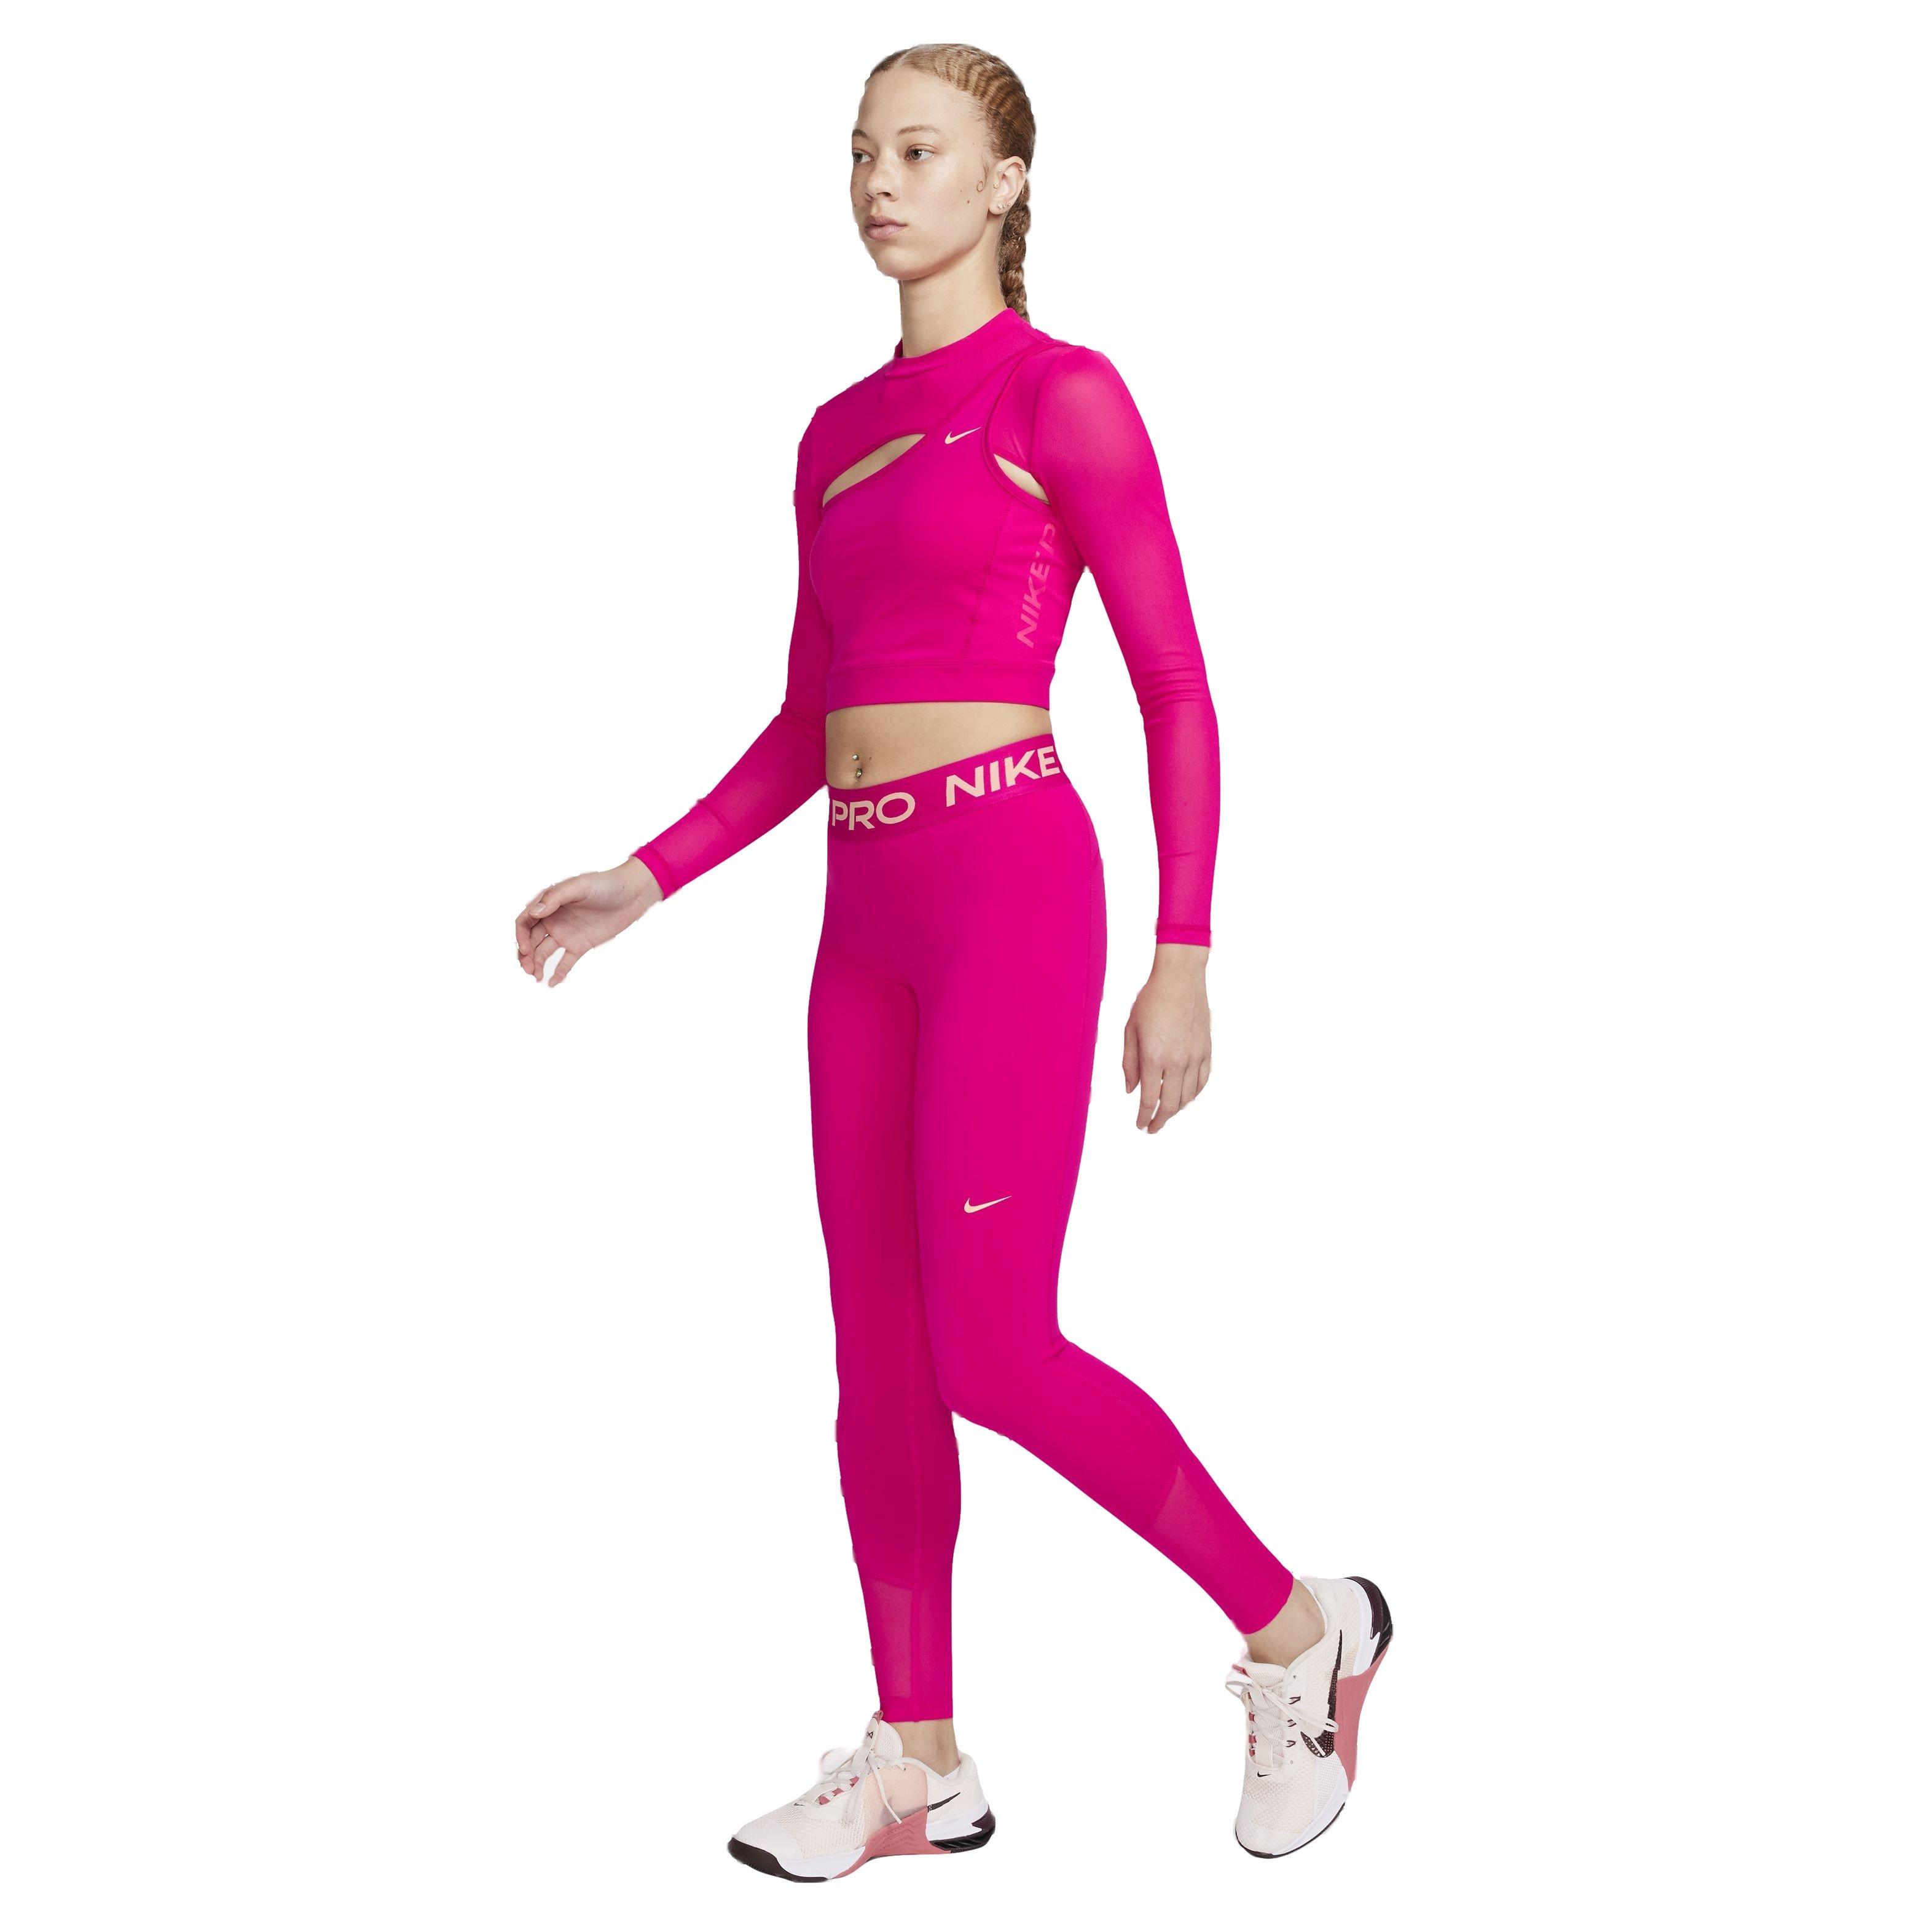 Nike Training One Dri-Fit mid rise leggings in fireberry pink